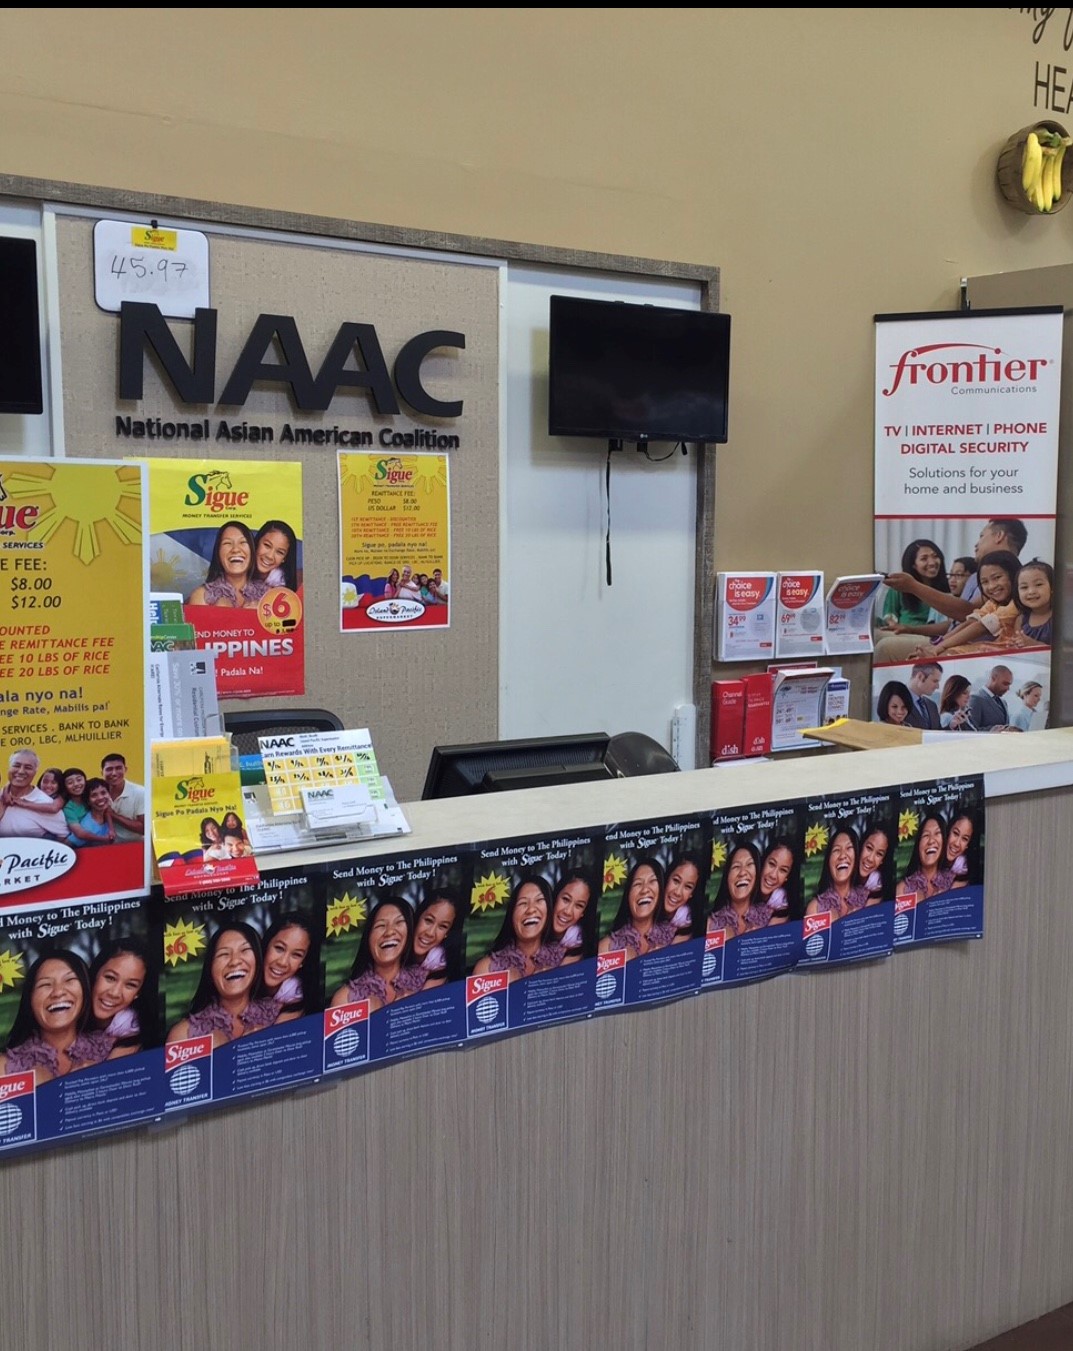 Booth in Pacific Island for NAAC